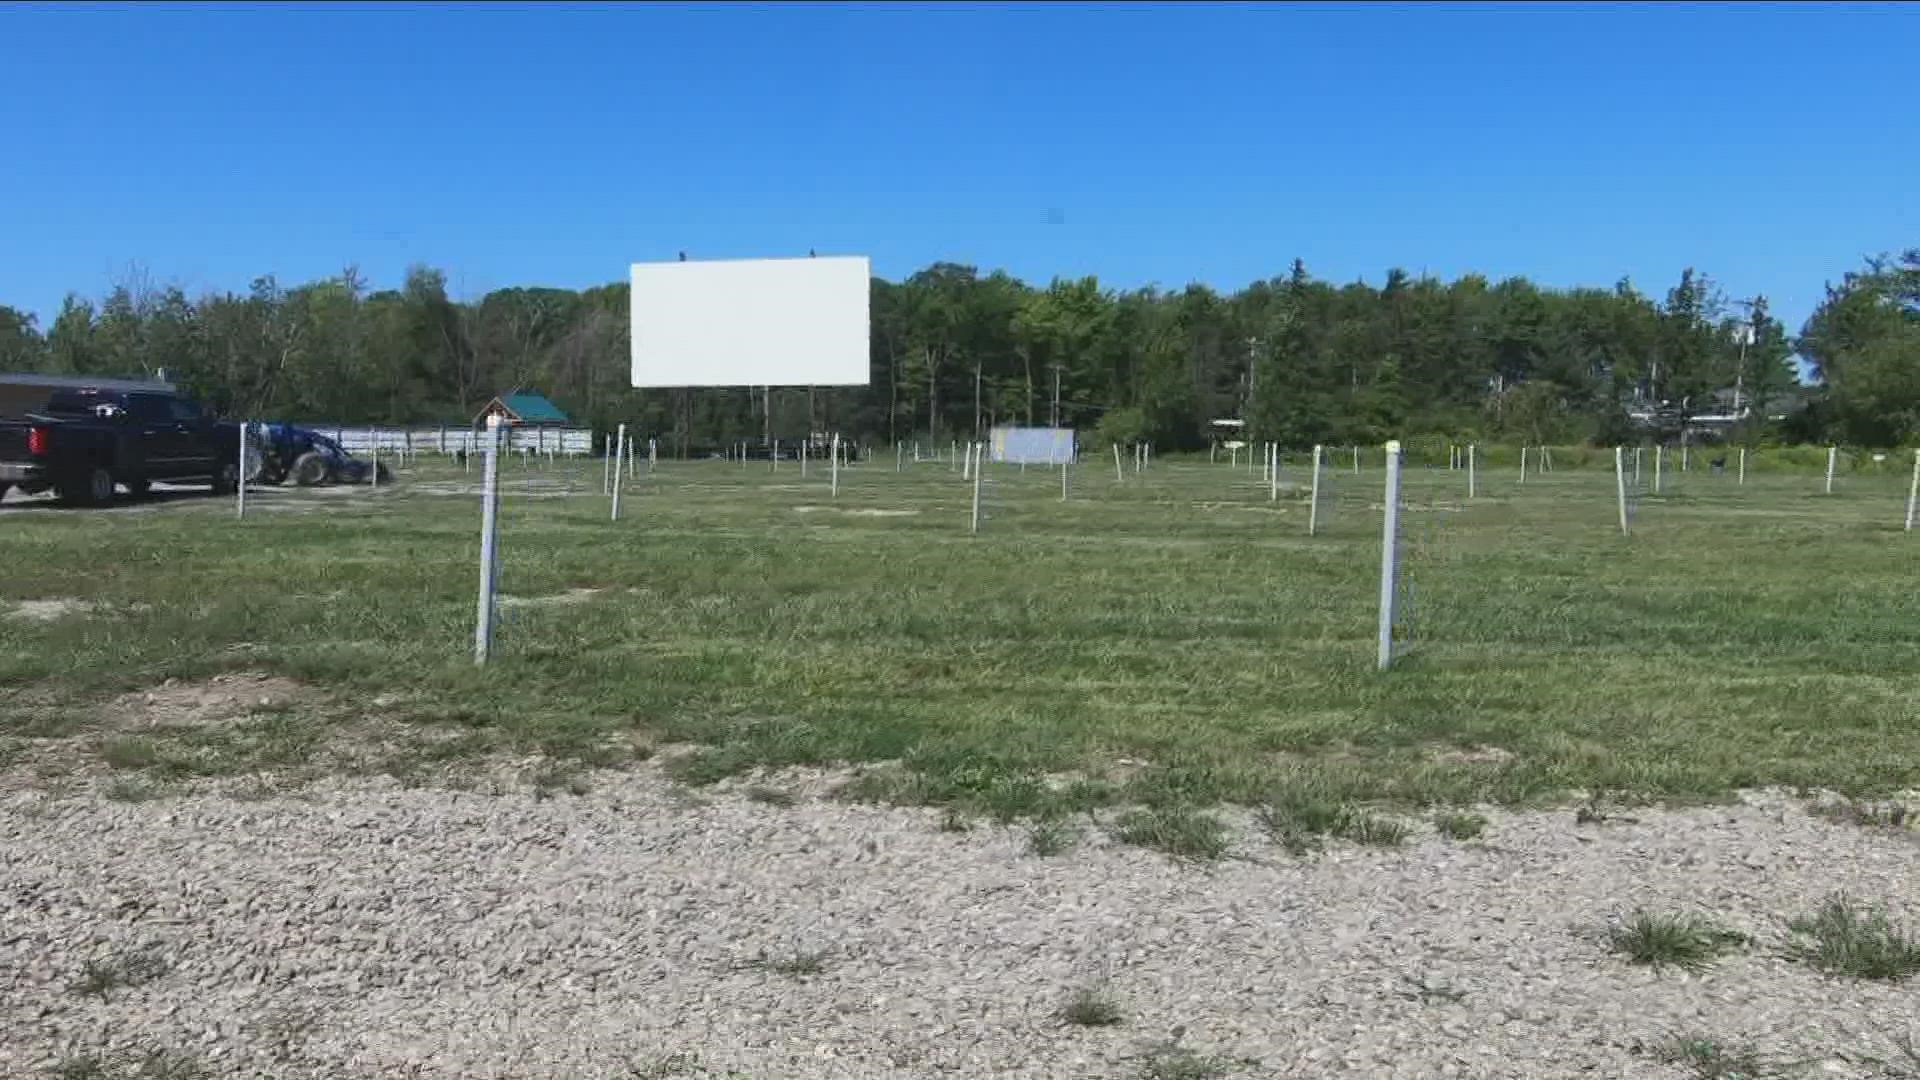 Dunkirk Drive-In Celebrating First Season After Decades Of Being Closed